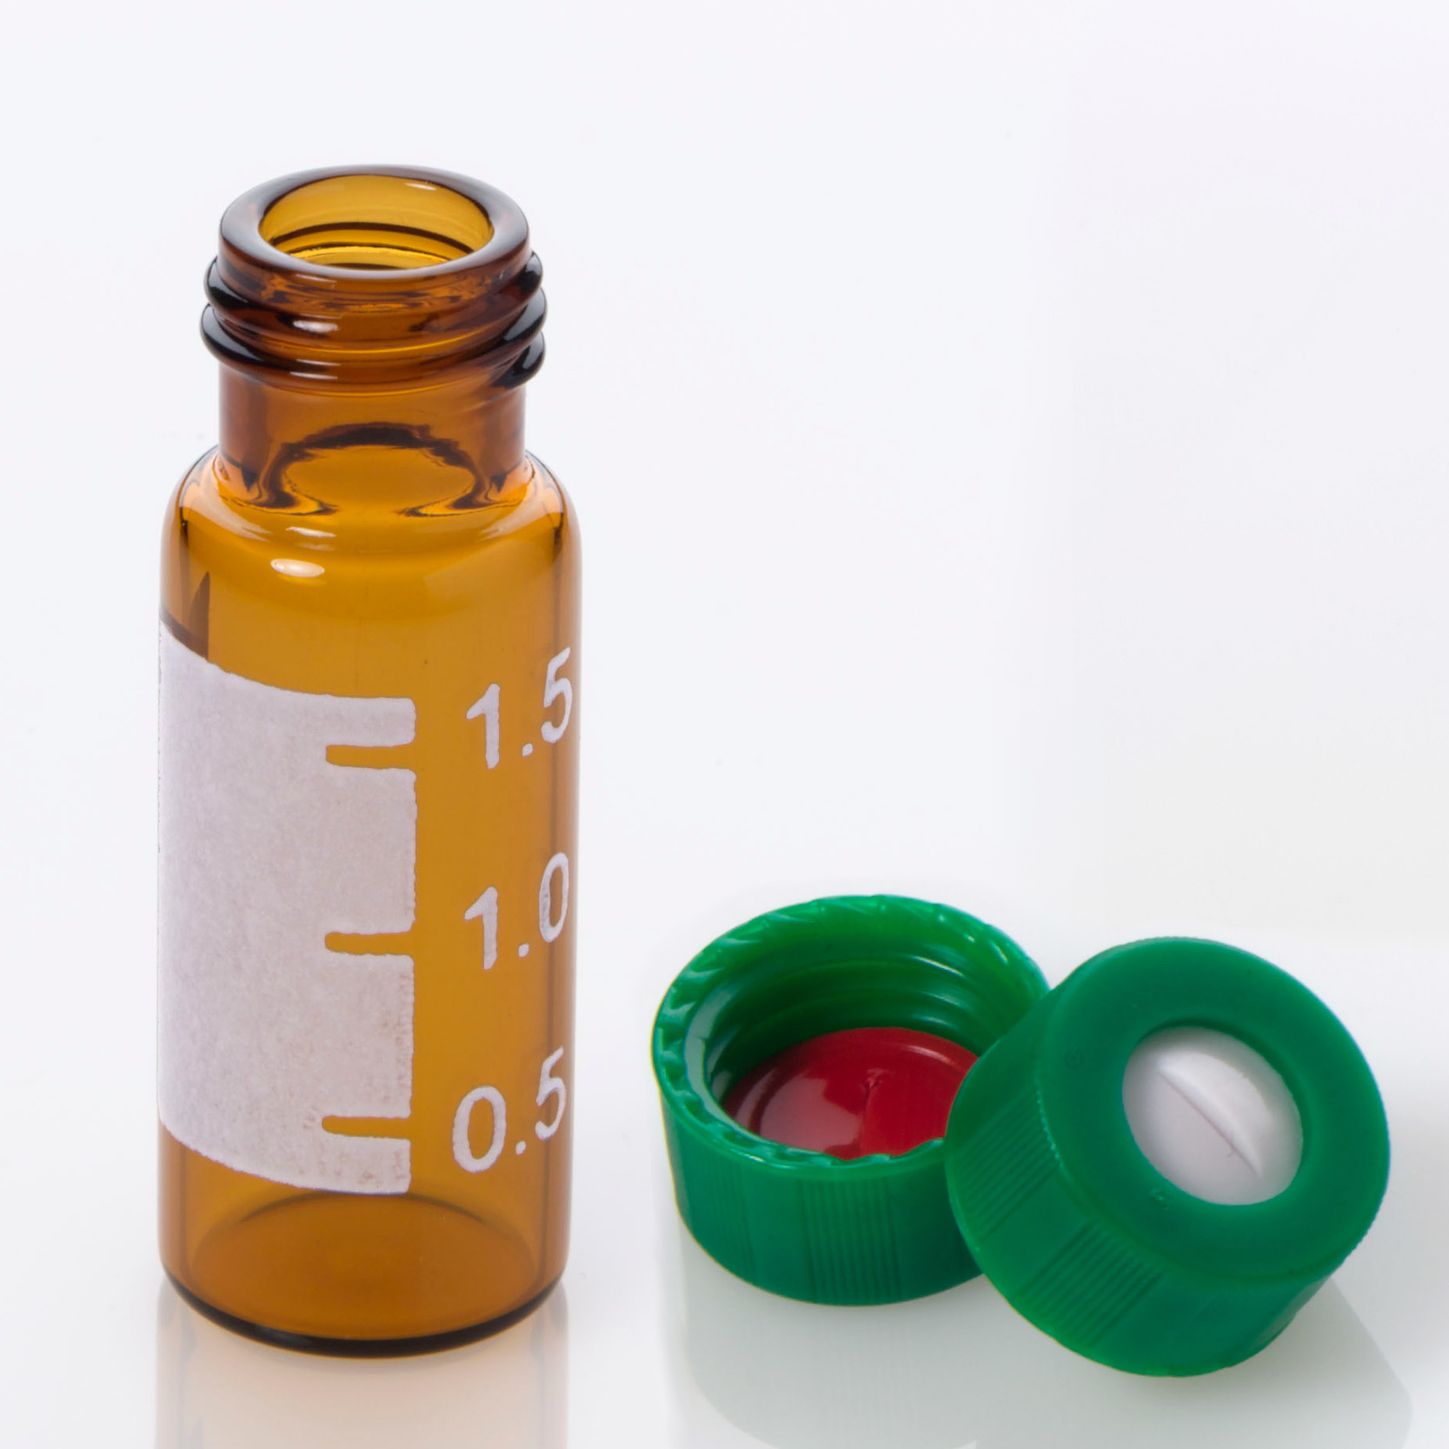 Vial Kit: 2mL Amber Glass Vial with Graduated Marking Spot, 9-425 Green Polypropylene Screw Cap with 0.040" Bonded Pre-Slit PTFE/Silicone Septa, 100/pk